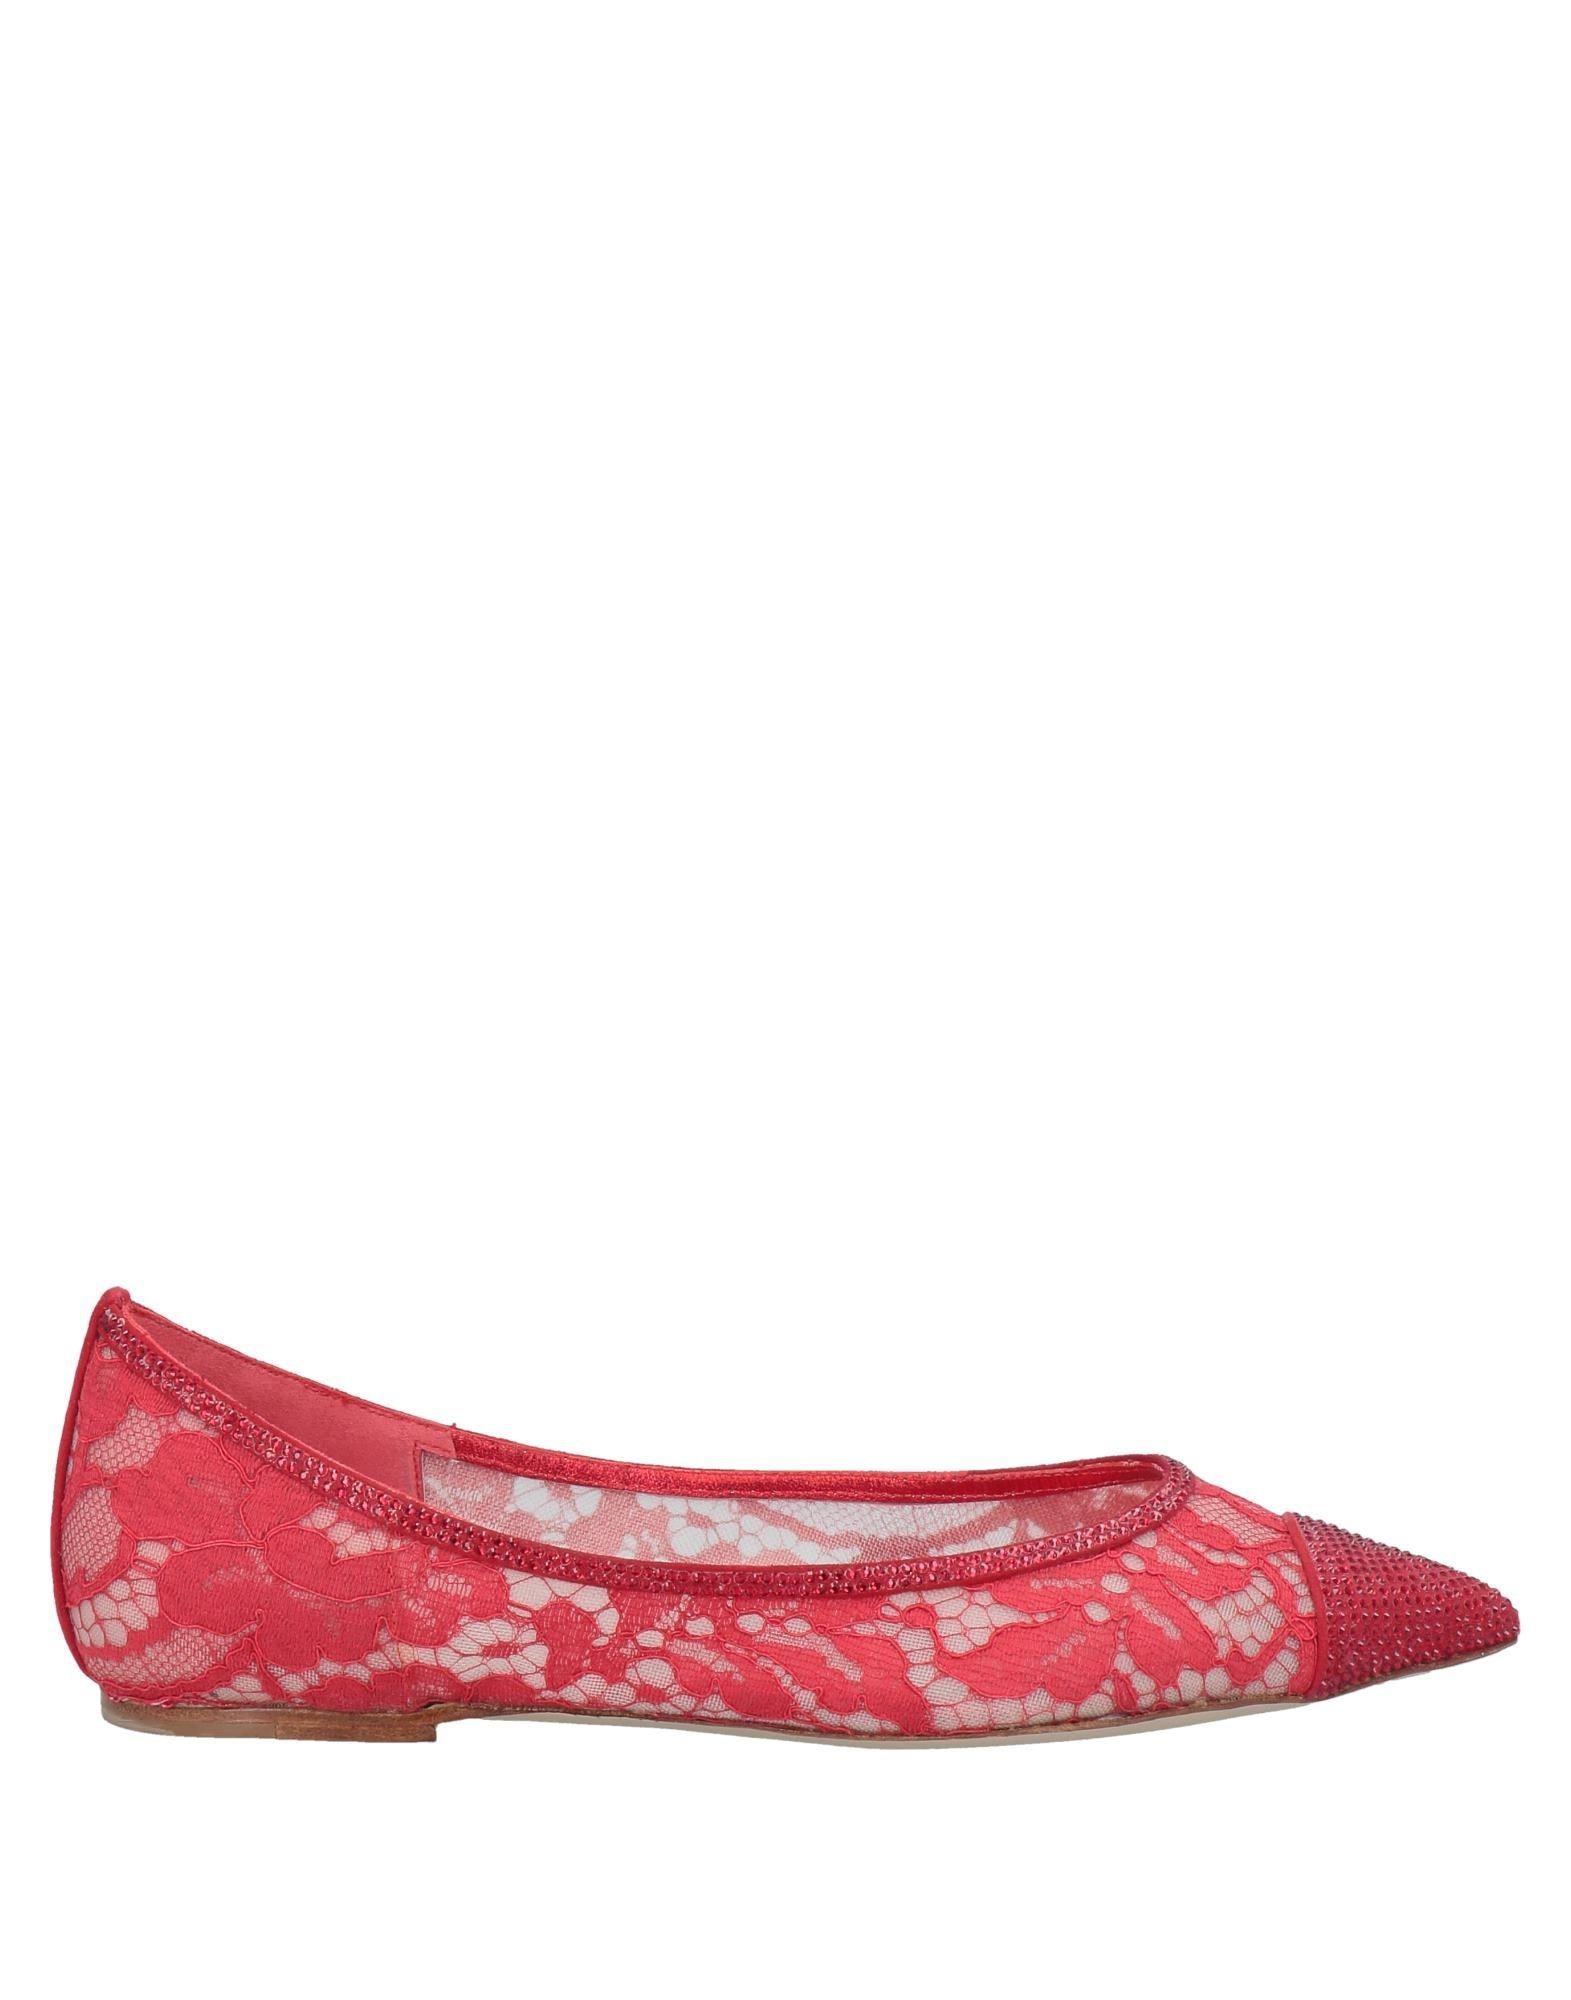 Le Silla Ballet Flats in Red | Lyst